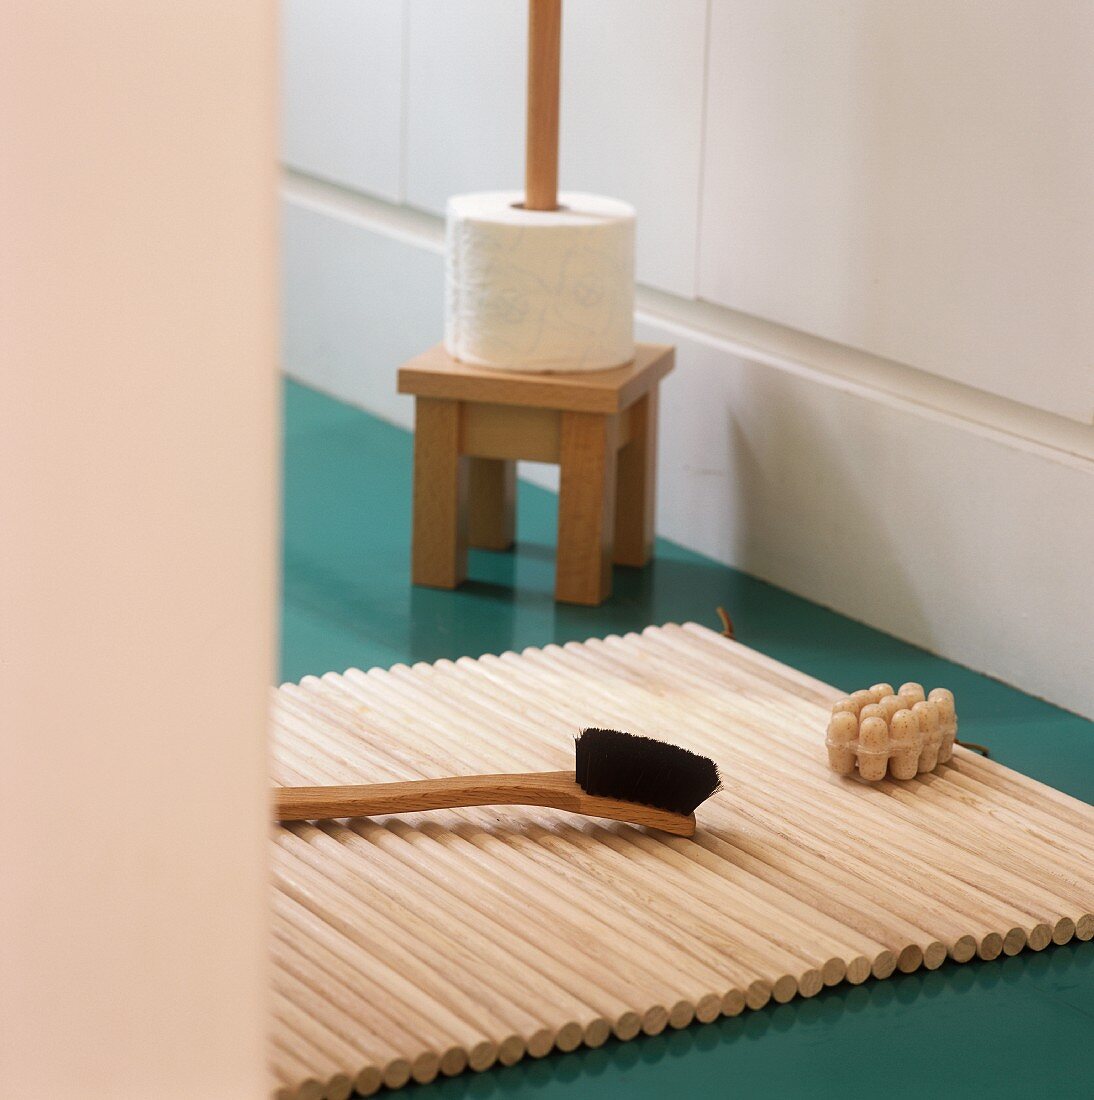 A brush on a wooden mat and a toilet roll holder